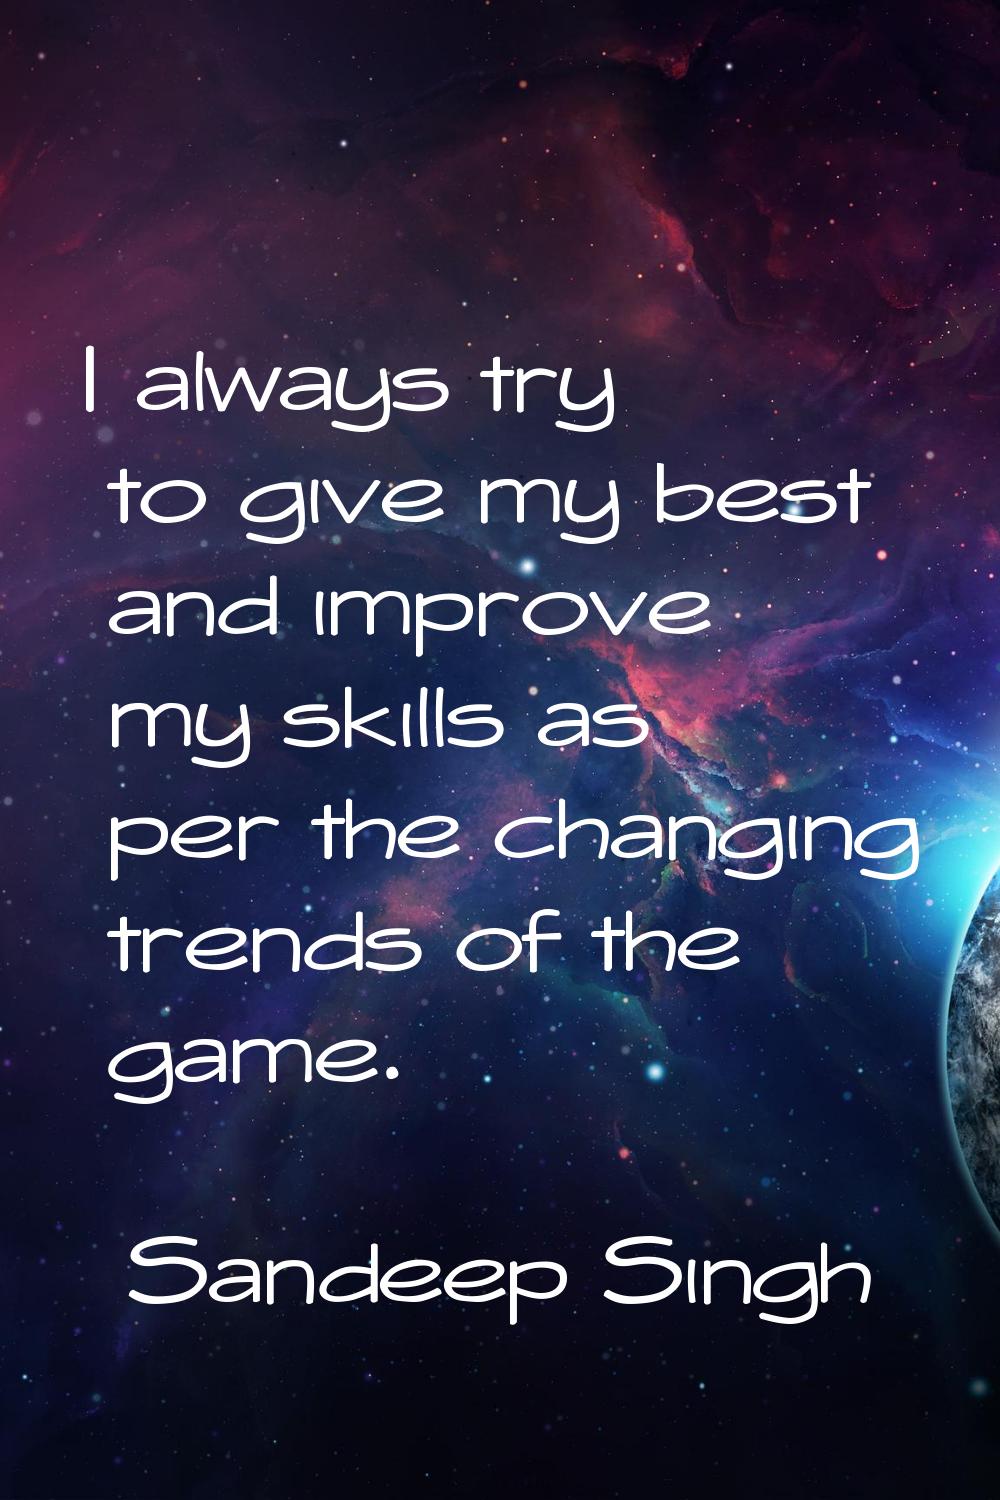 I always try to give my best and improve my skills as per the changing trends of the game.